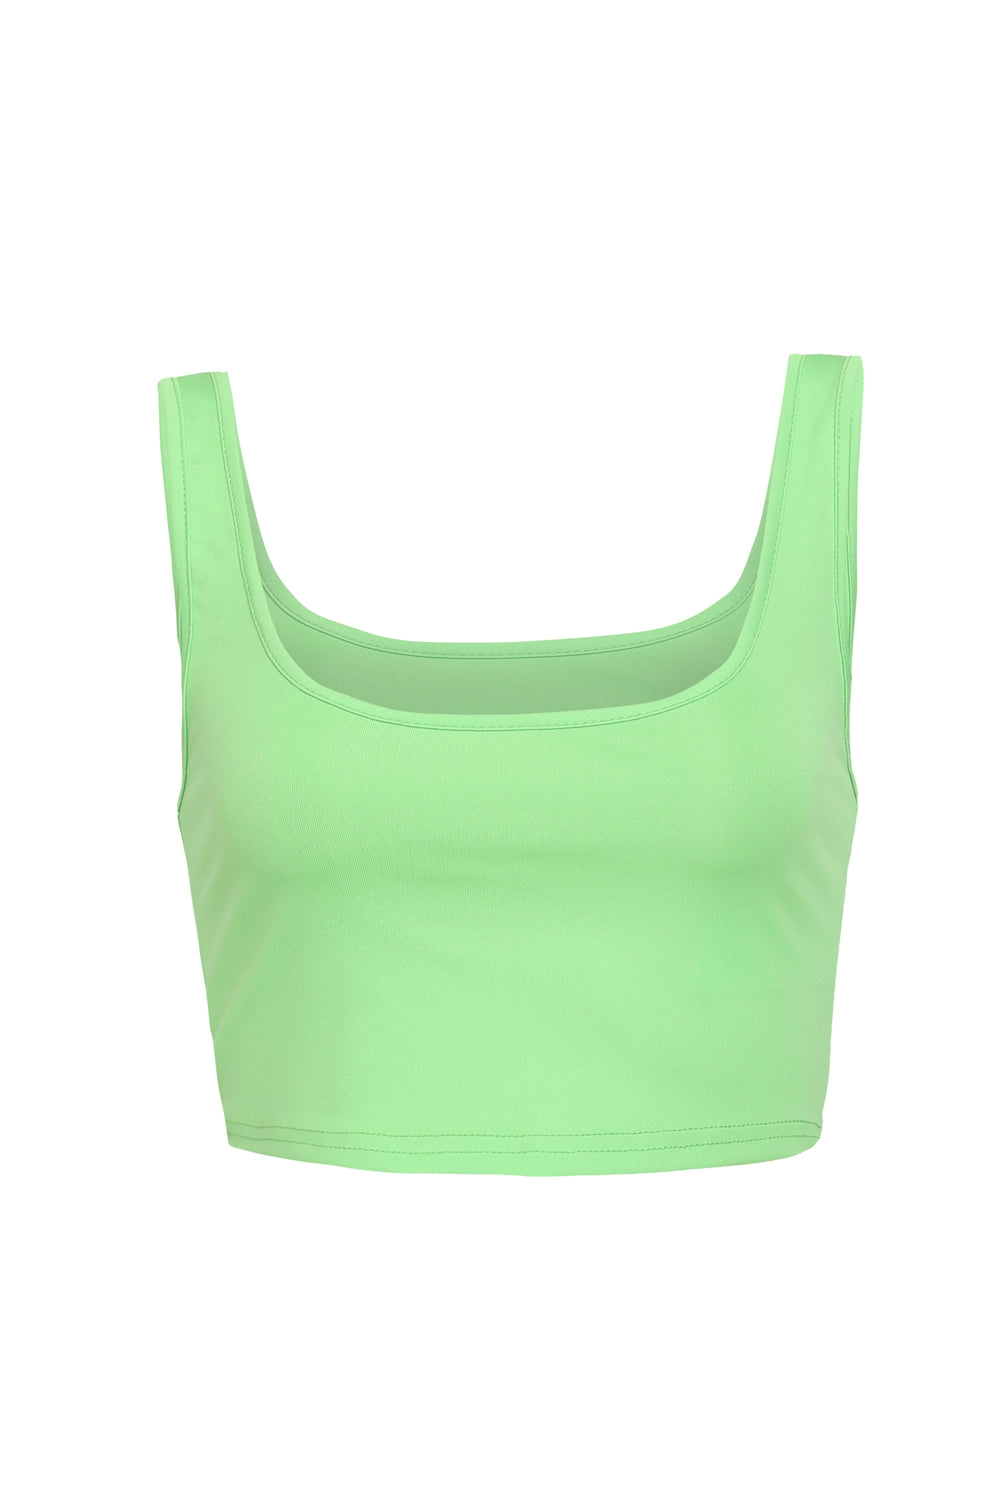 Thick Strap Bustier Neon Green